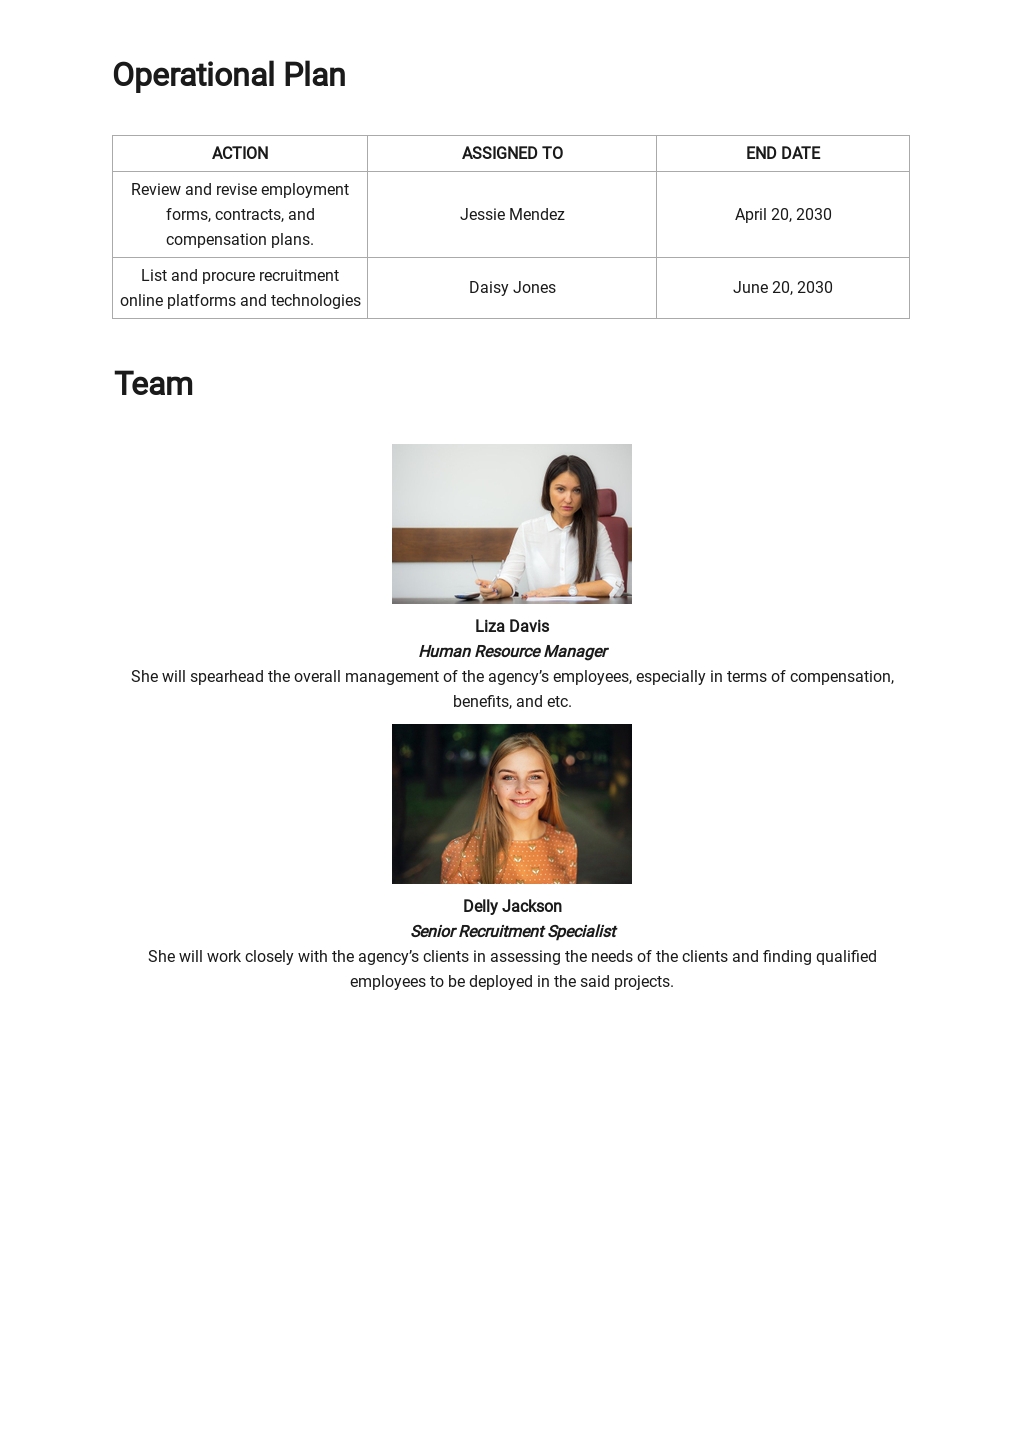 Recruitment/Staffing Agency Business Plan Template - Google Docs In Recruitment Agency Business Plan Template